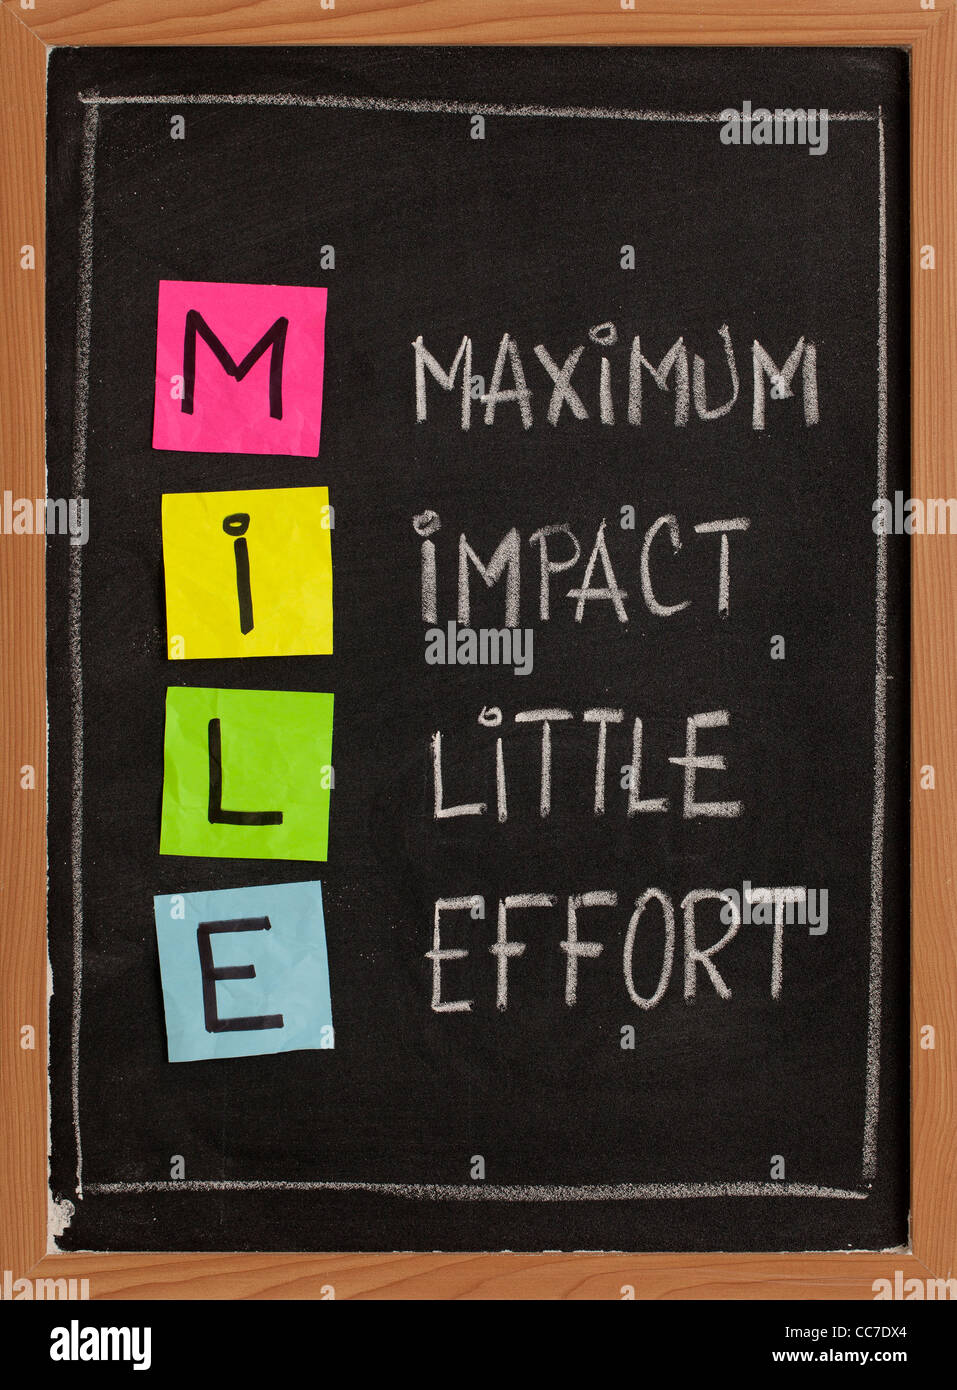 MILE acronym (maximum impact, little effort), productivity or efficiency concept sticky notes and chalk handwriting Stock Photo